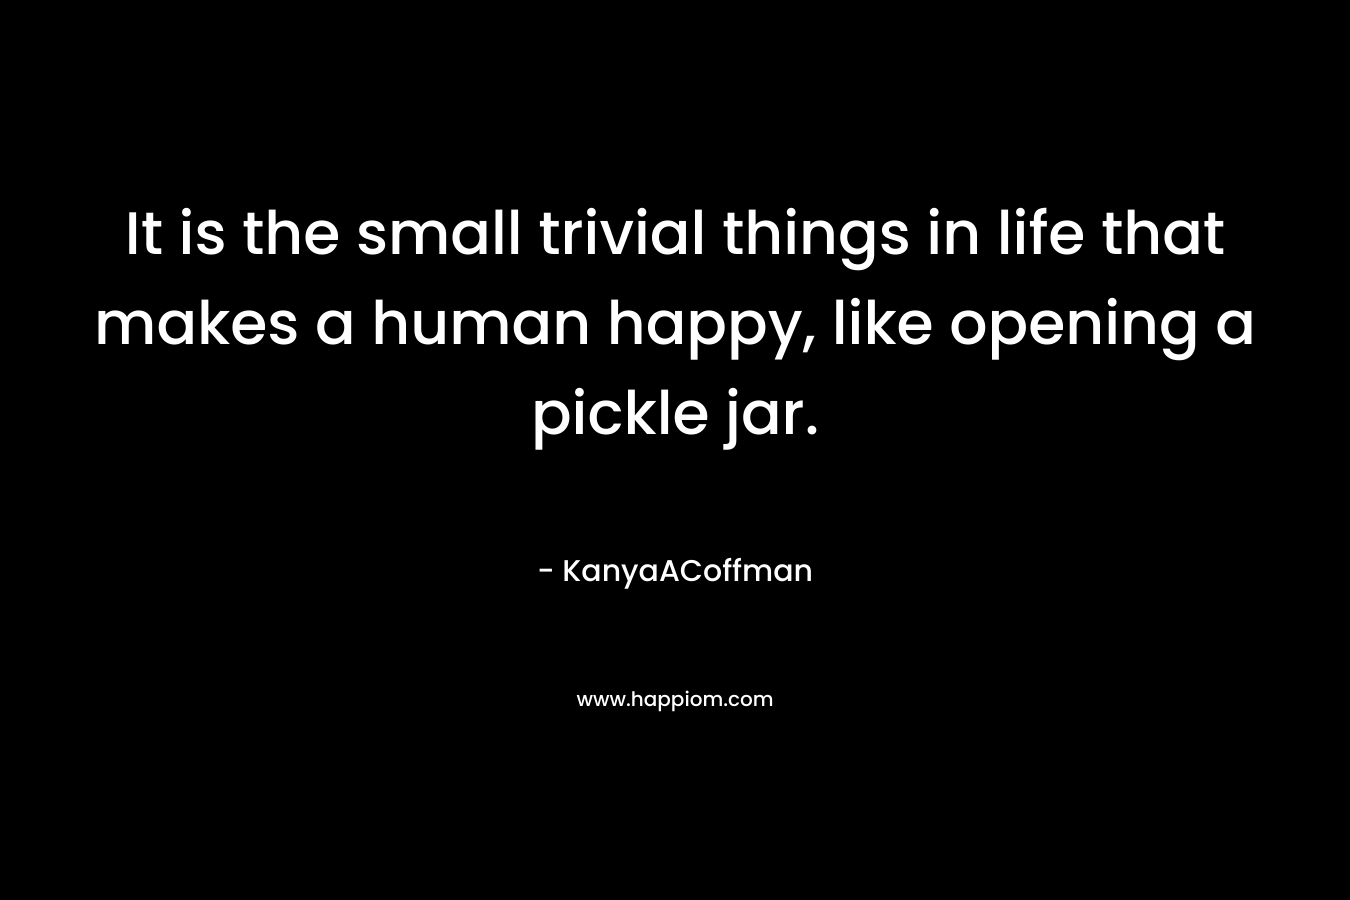 It is the small trivial things in life that makes a human happy, like opening a pickle jar. – KanyaACoffman